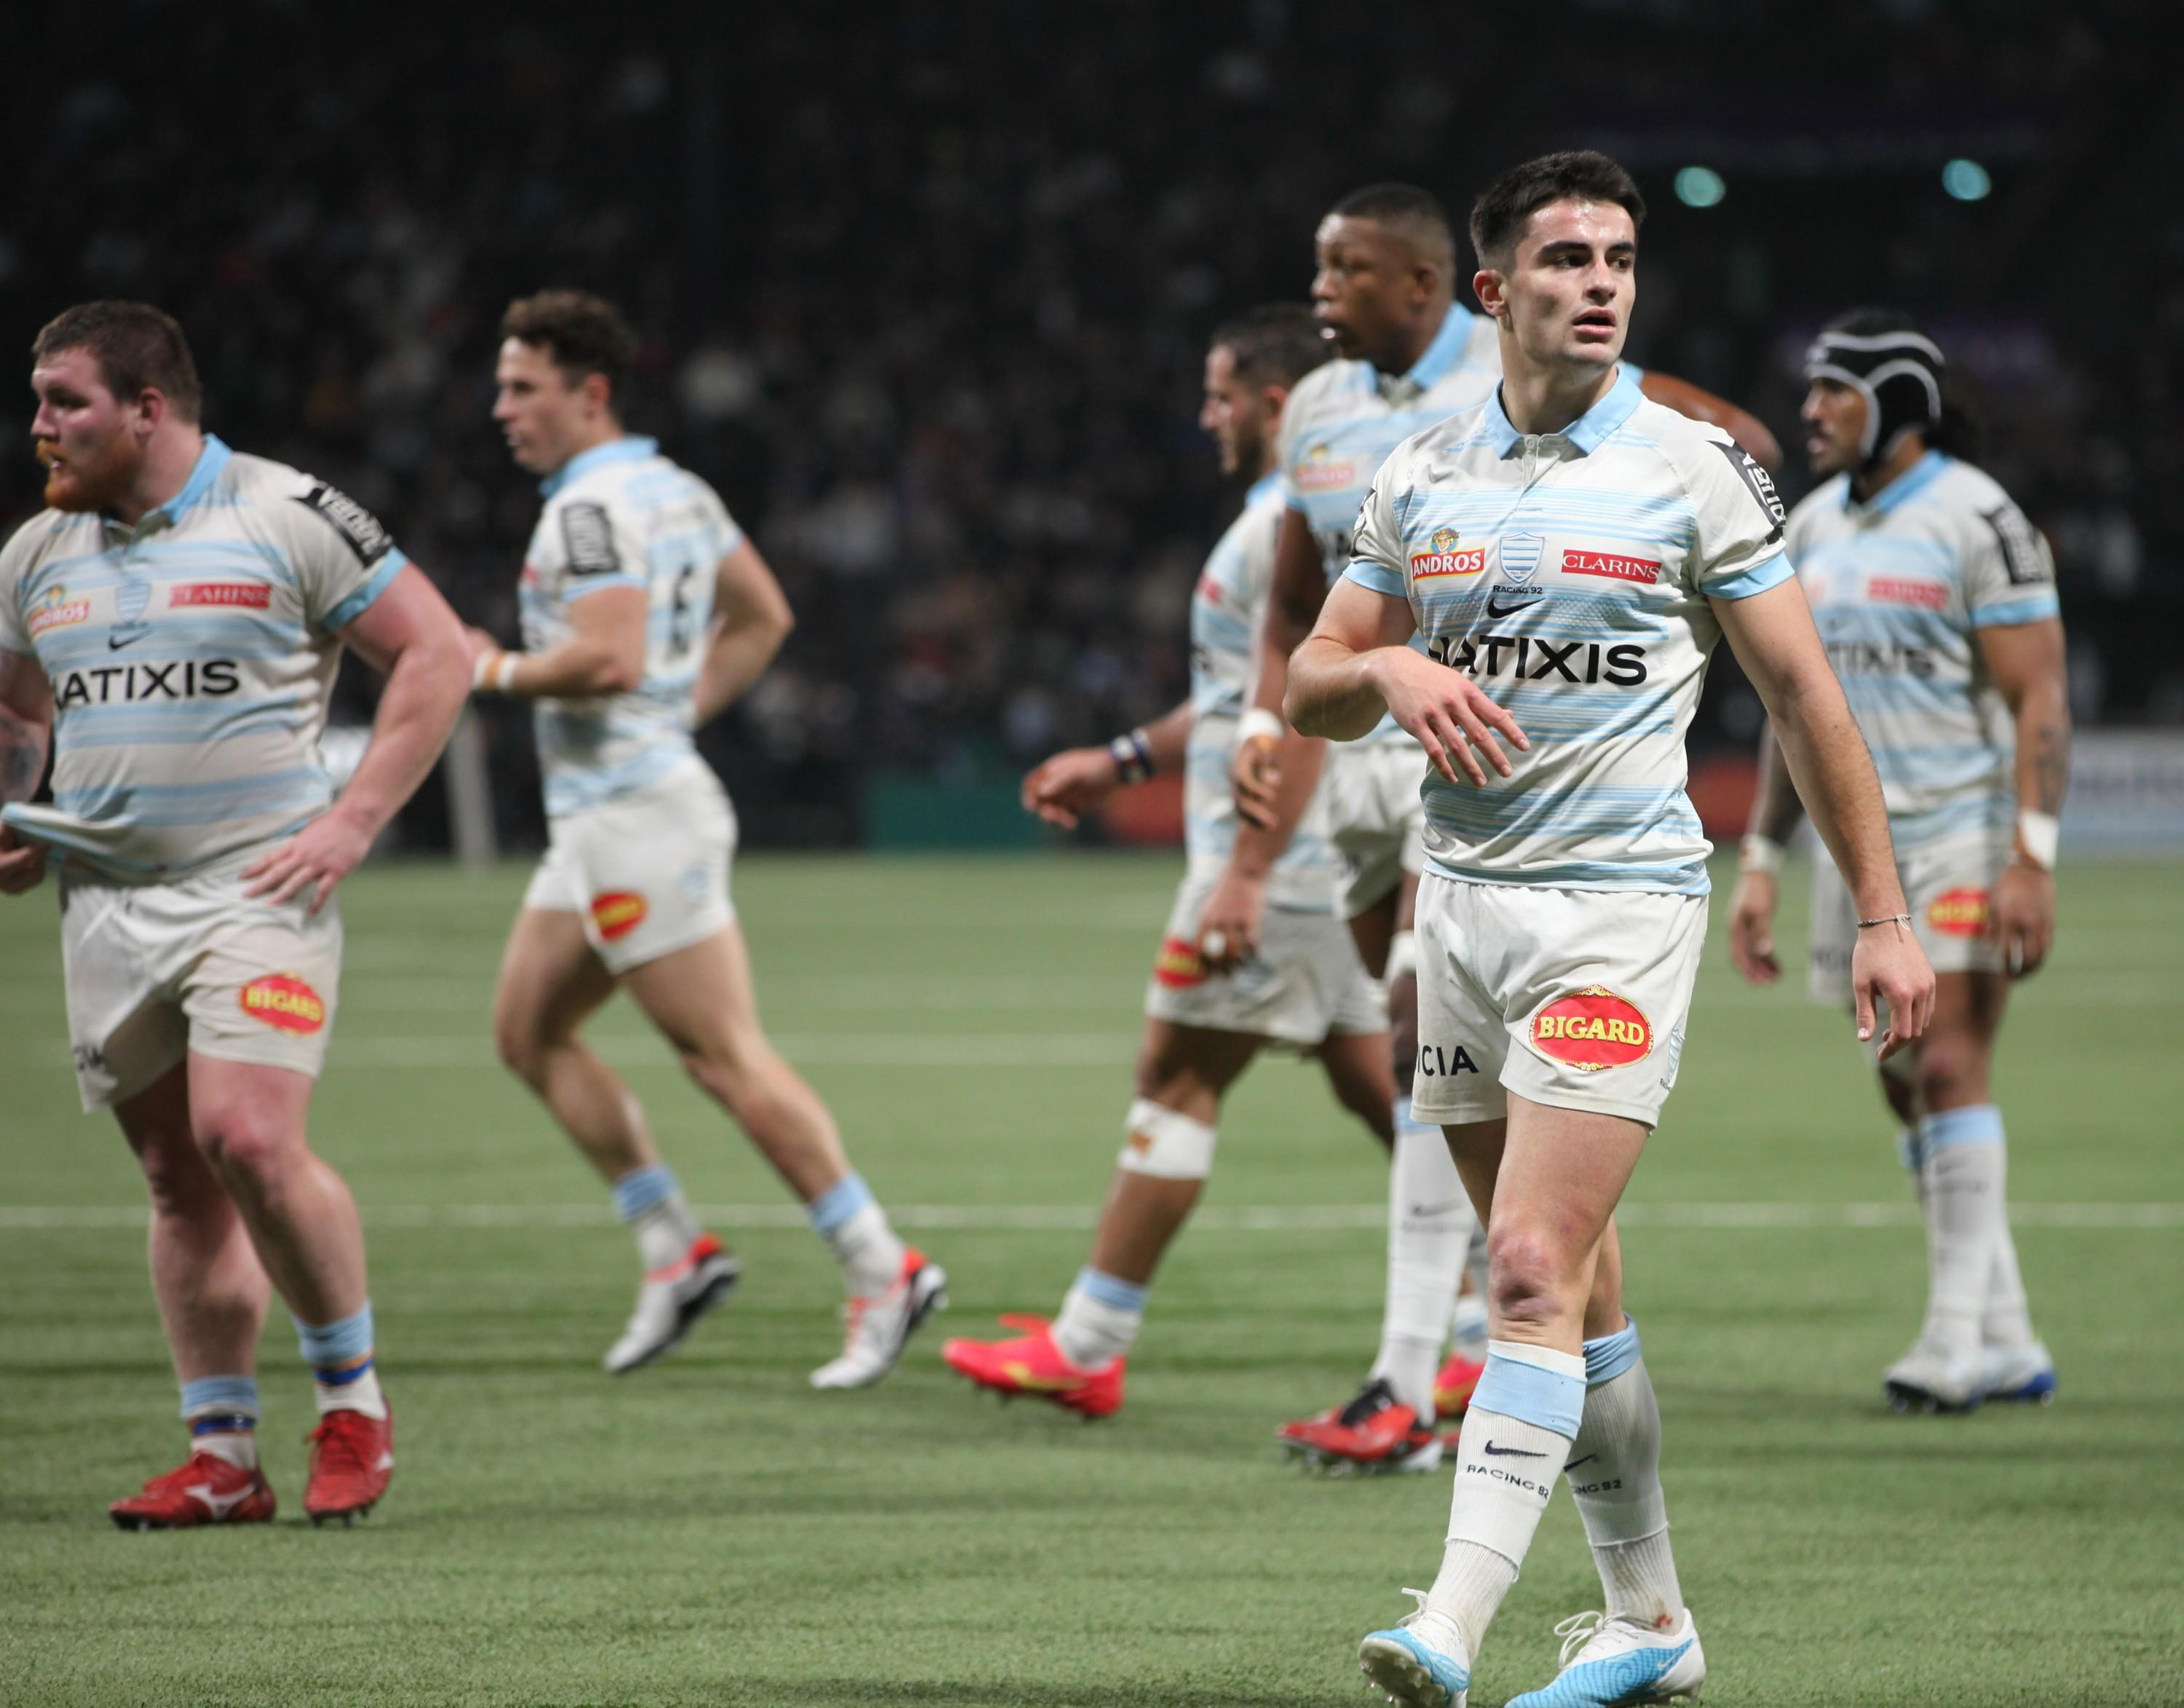 Top 14: at what time and on which channel to watch Racing 92-Stade Toulousain?